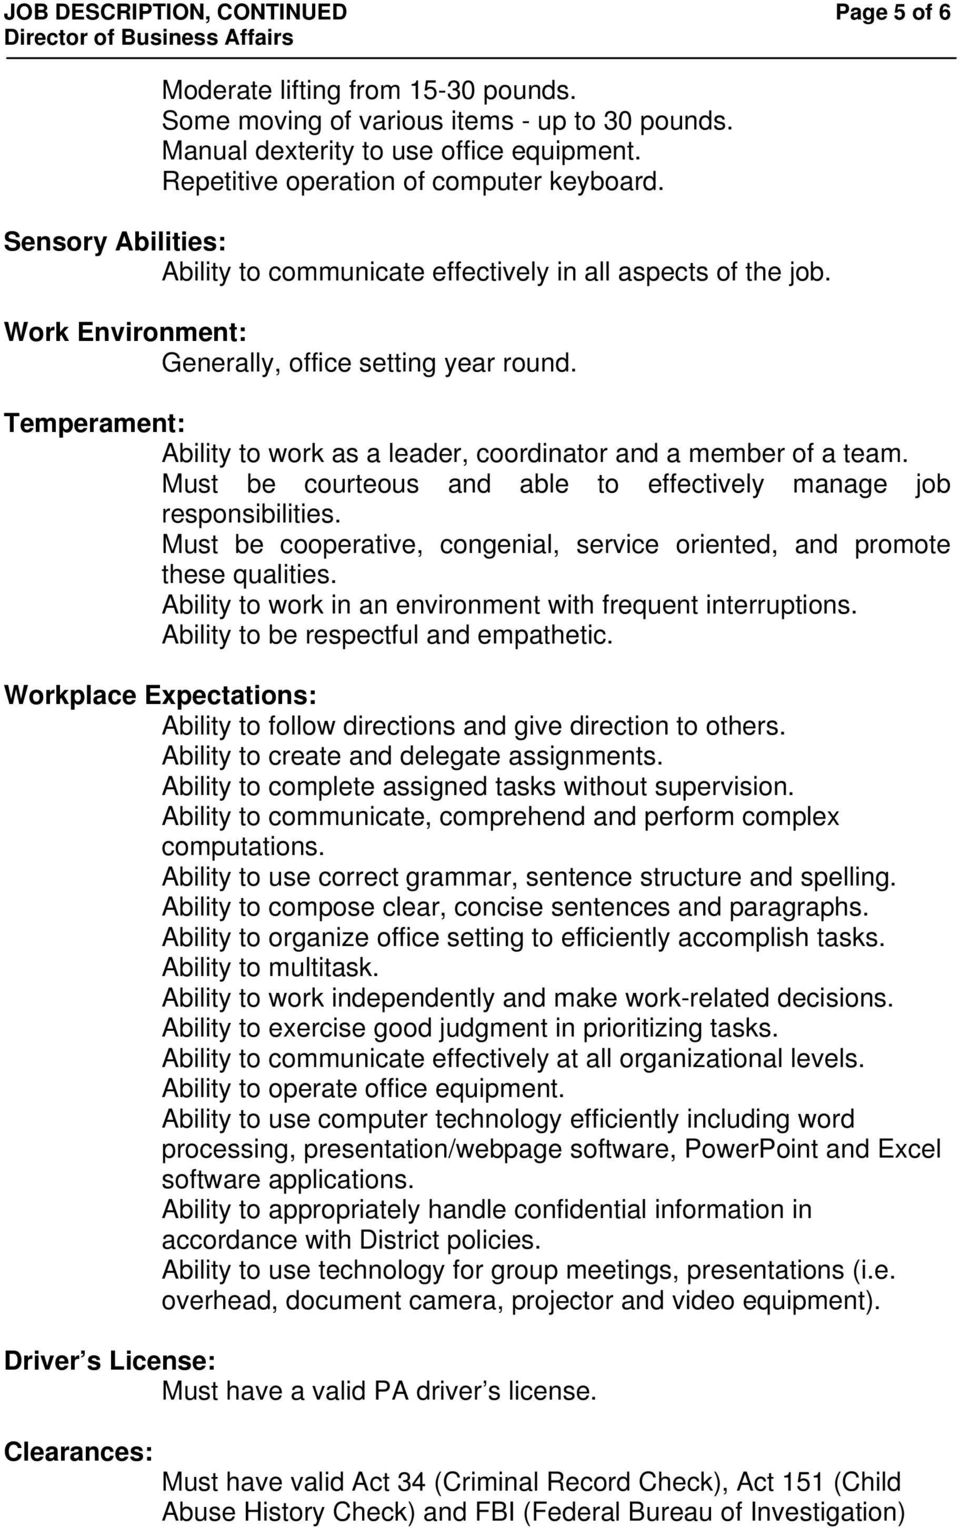 Temperament: Ability to work as a leader, coordinator and a member of a team. Must be courteous and able to effectively manage job responsibilities.